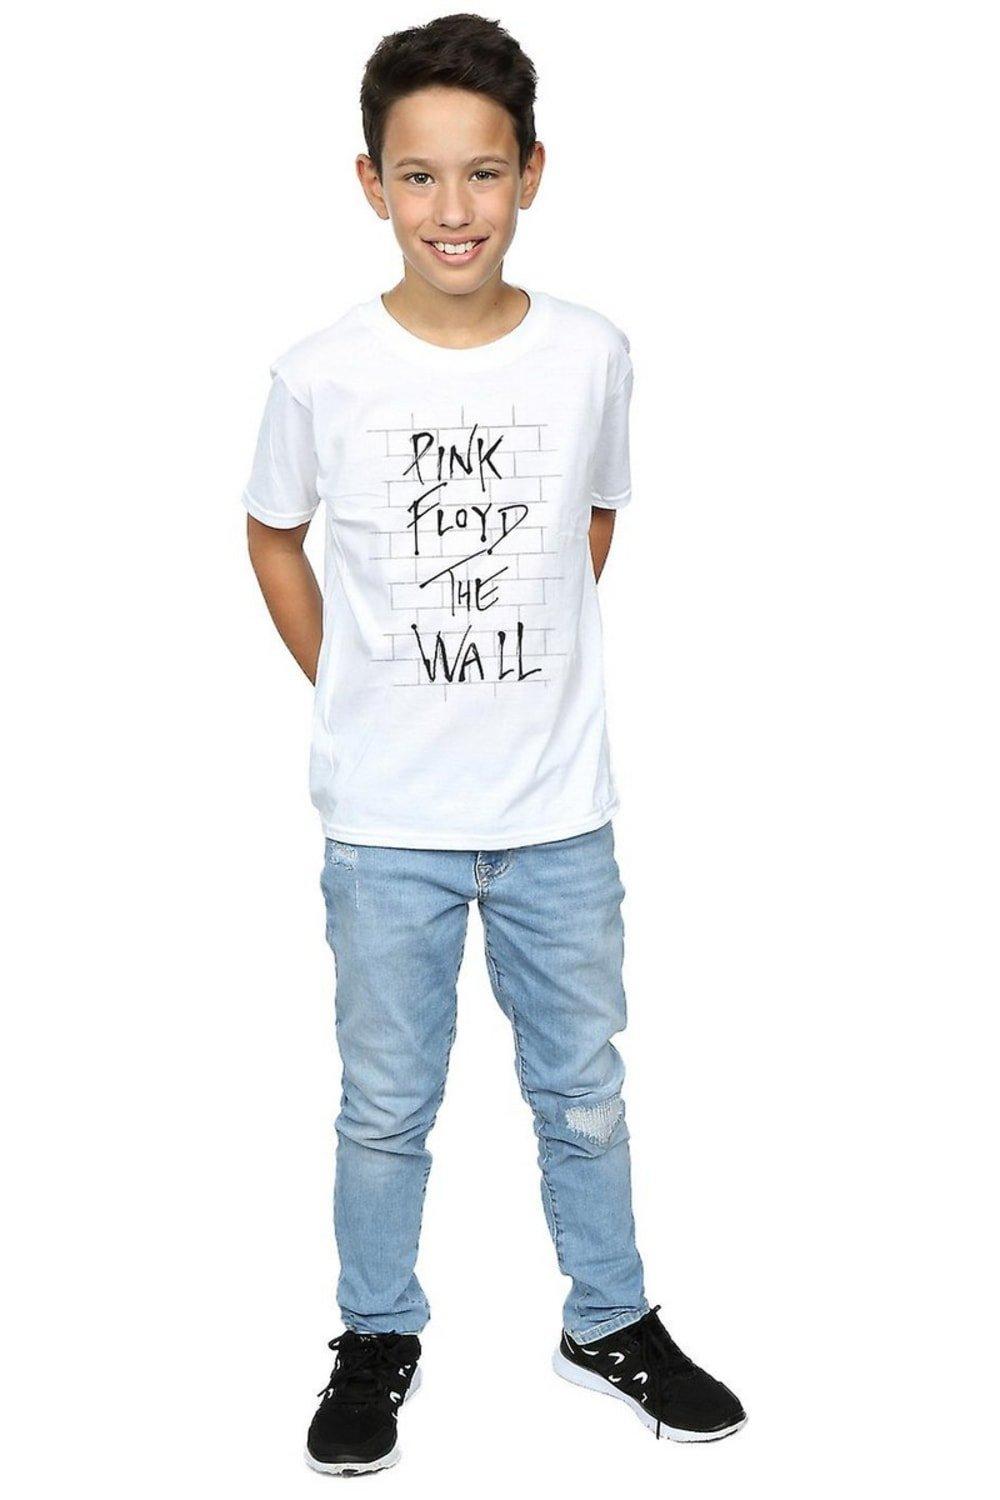 The Wall Cotton T-Shirt